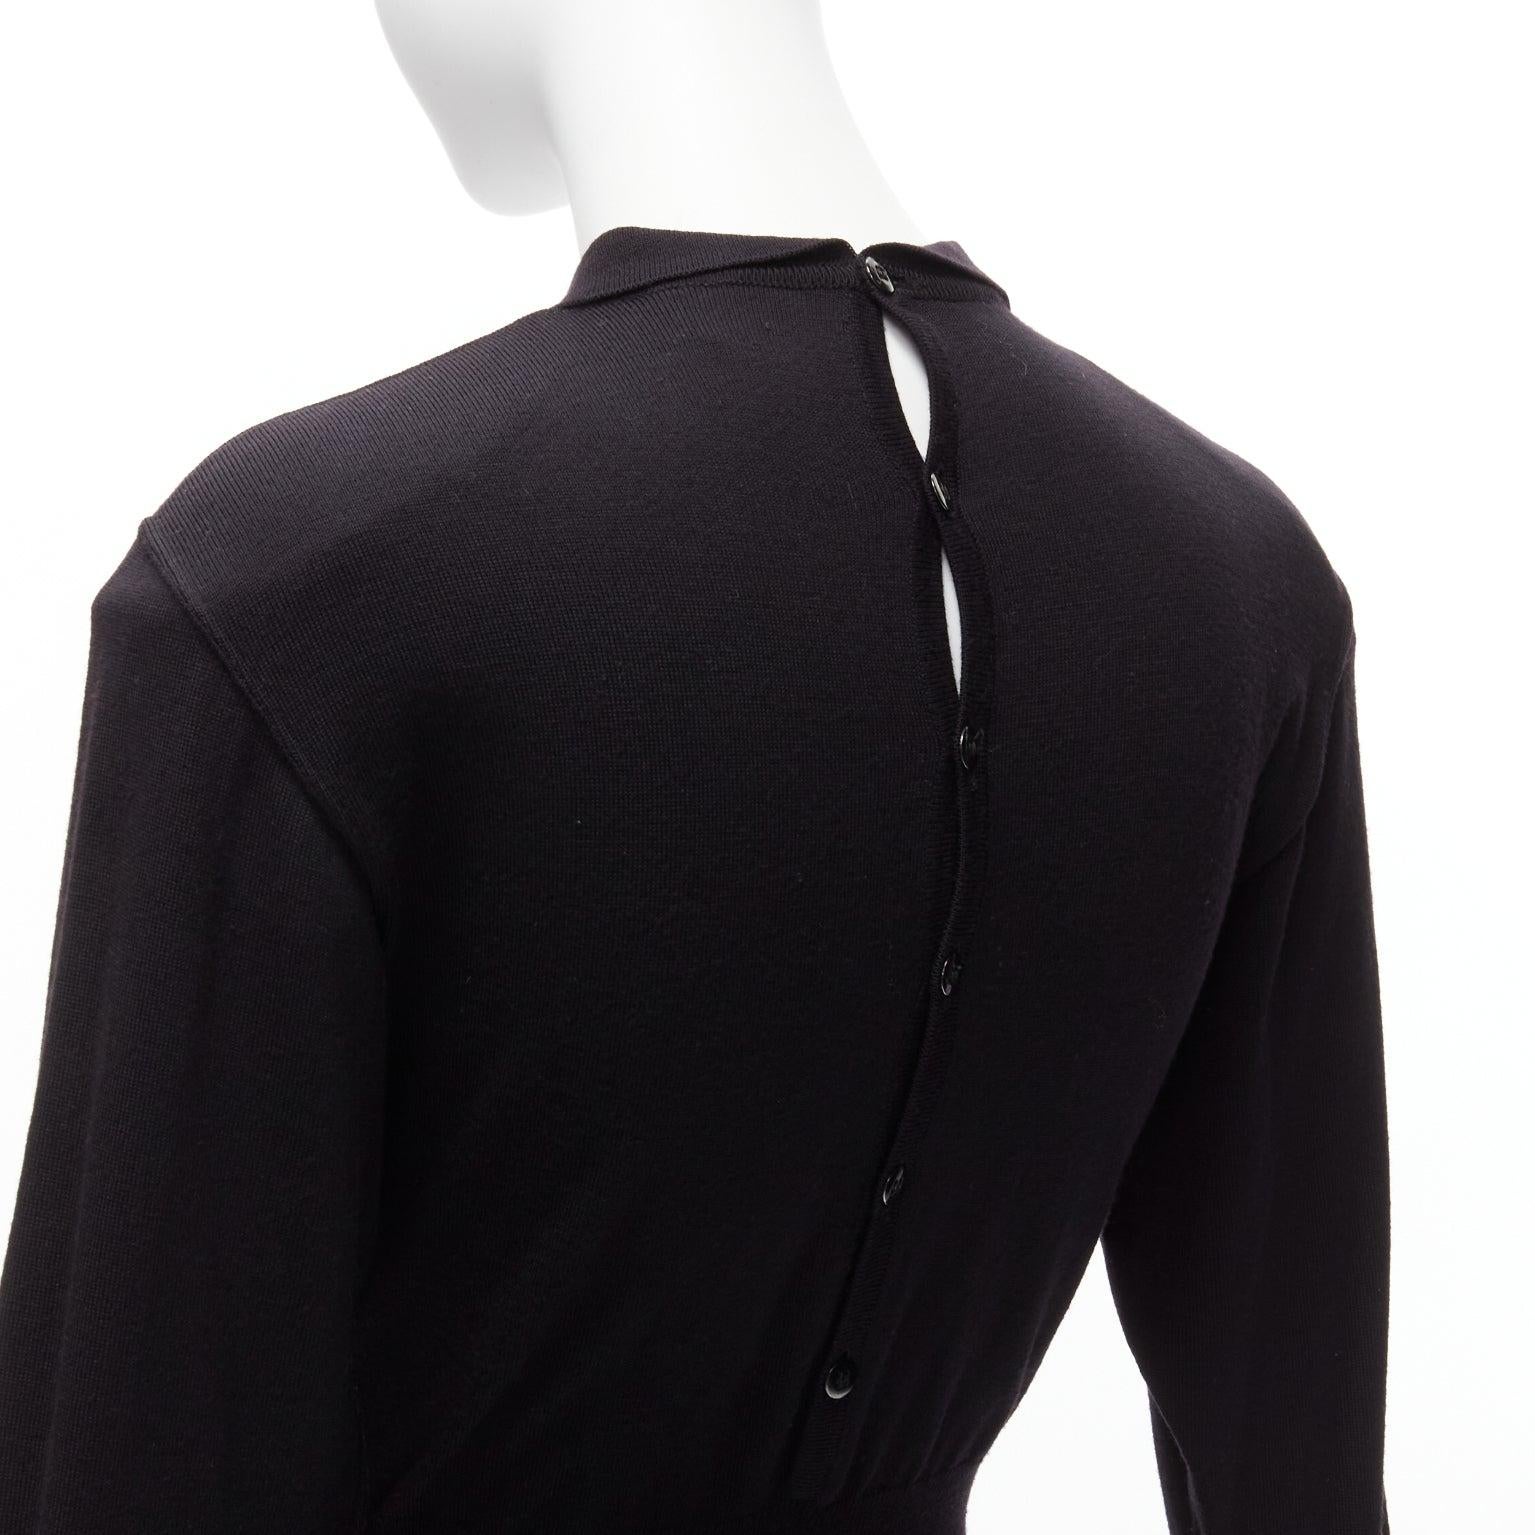 AZZEDINE ALAIA Vintage black 100% virgin wool collared long sleeve bodycon dress FR40 M
Reference: TGAS/D00426
Brand: Alaia
Designer: Azzedine Alaia
Material: Virgin Wool
Color: Black
Pattern: Solid
Closure: Button
Extra Details: Back button